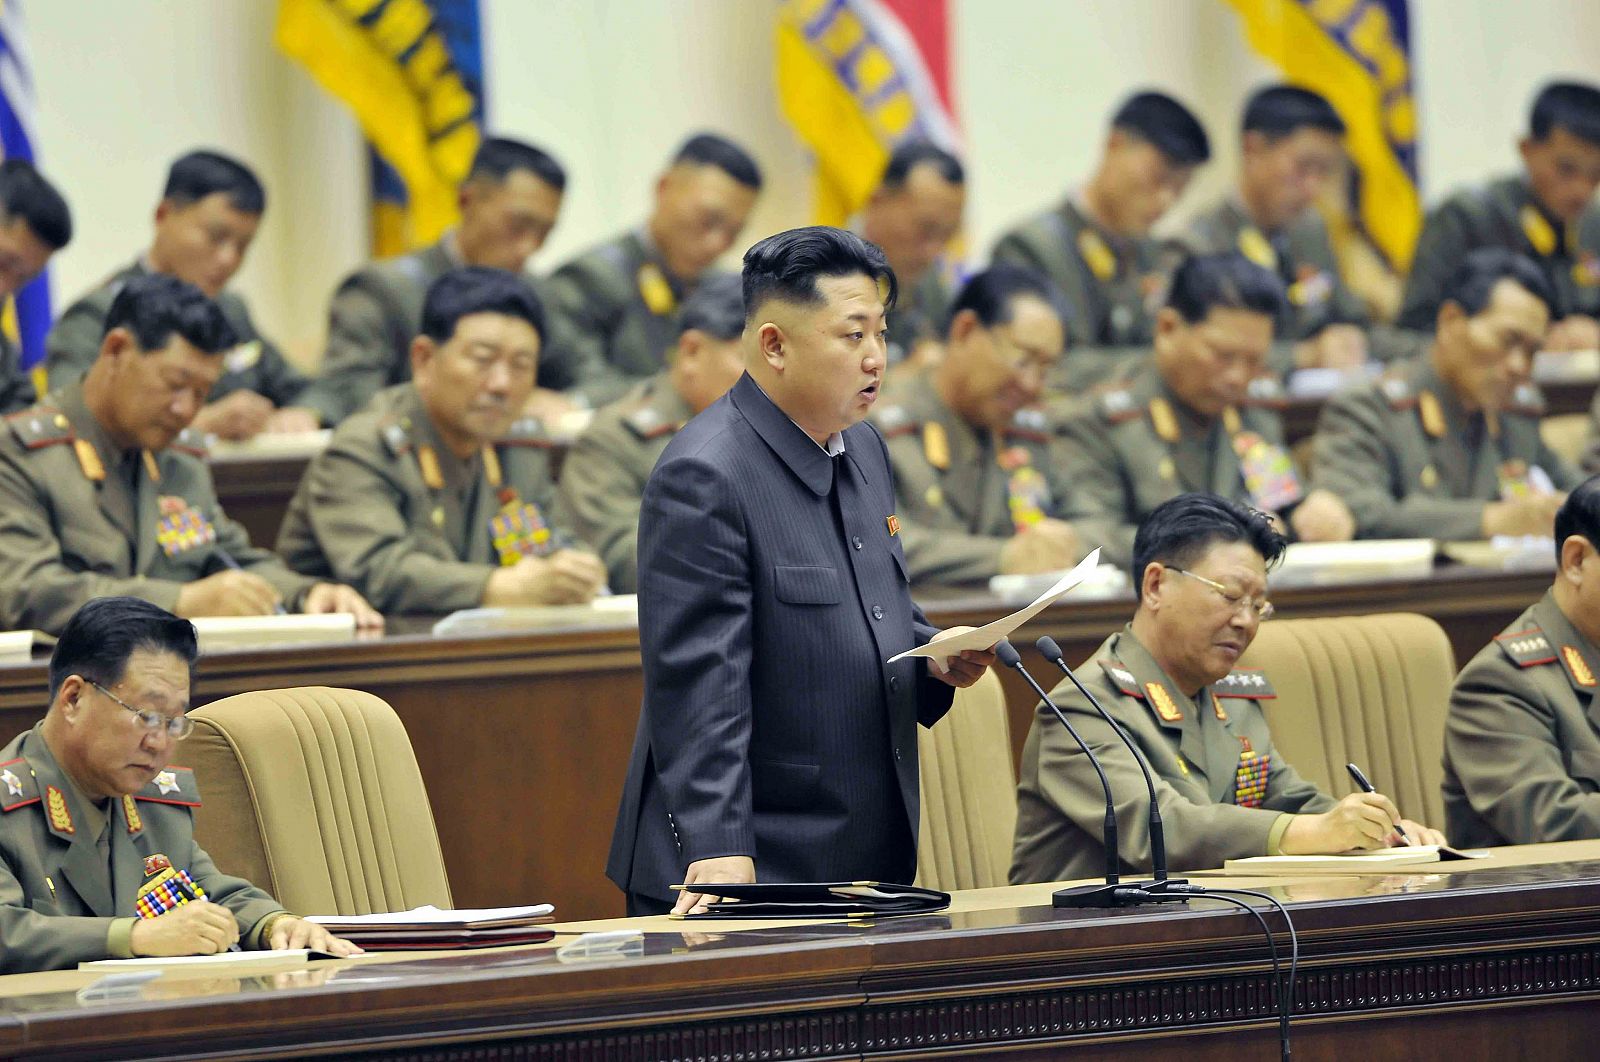 North Korean leader Kim Jong-un speaks during the fourth meeting of company commanders and political instructors of the Korean People's Army in this undated photo released by North Korea's Korean Central News Agency (KCNA) in Pyongyang